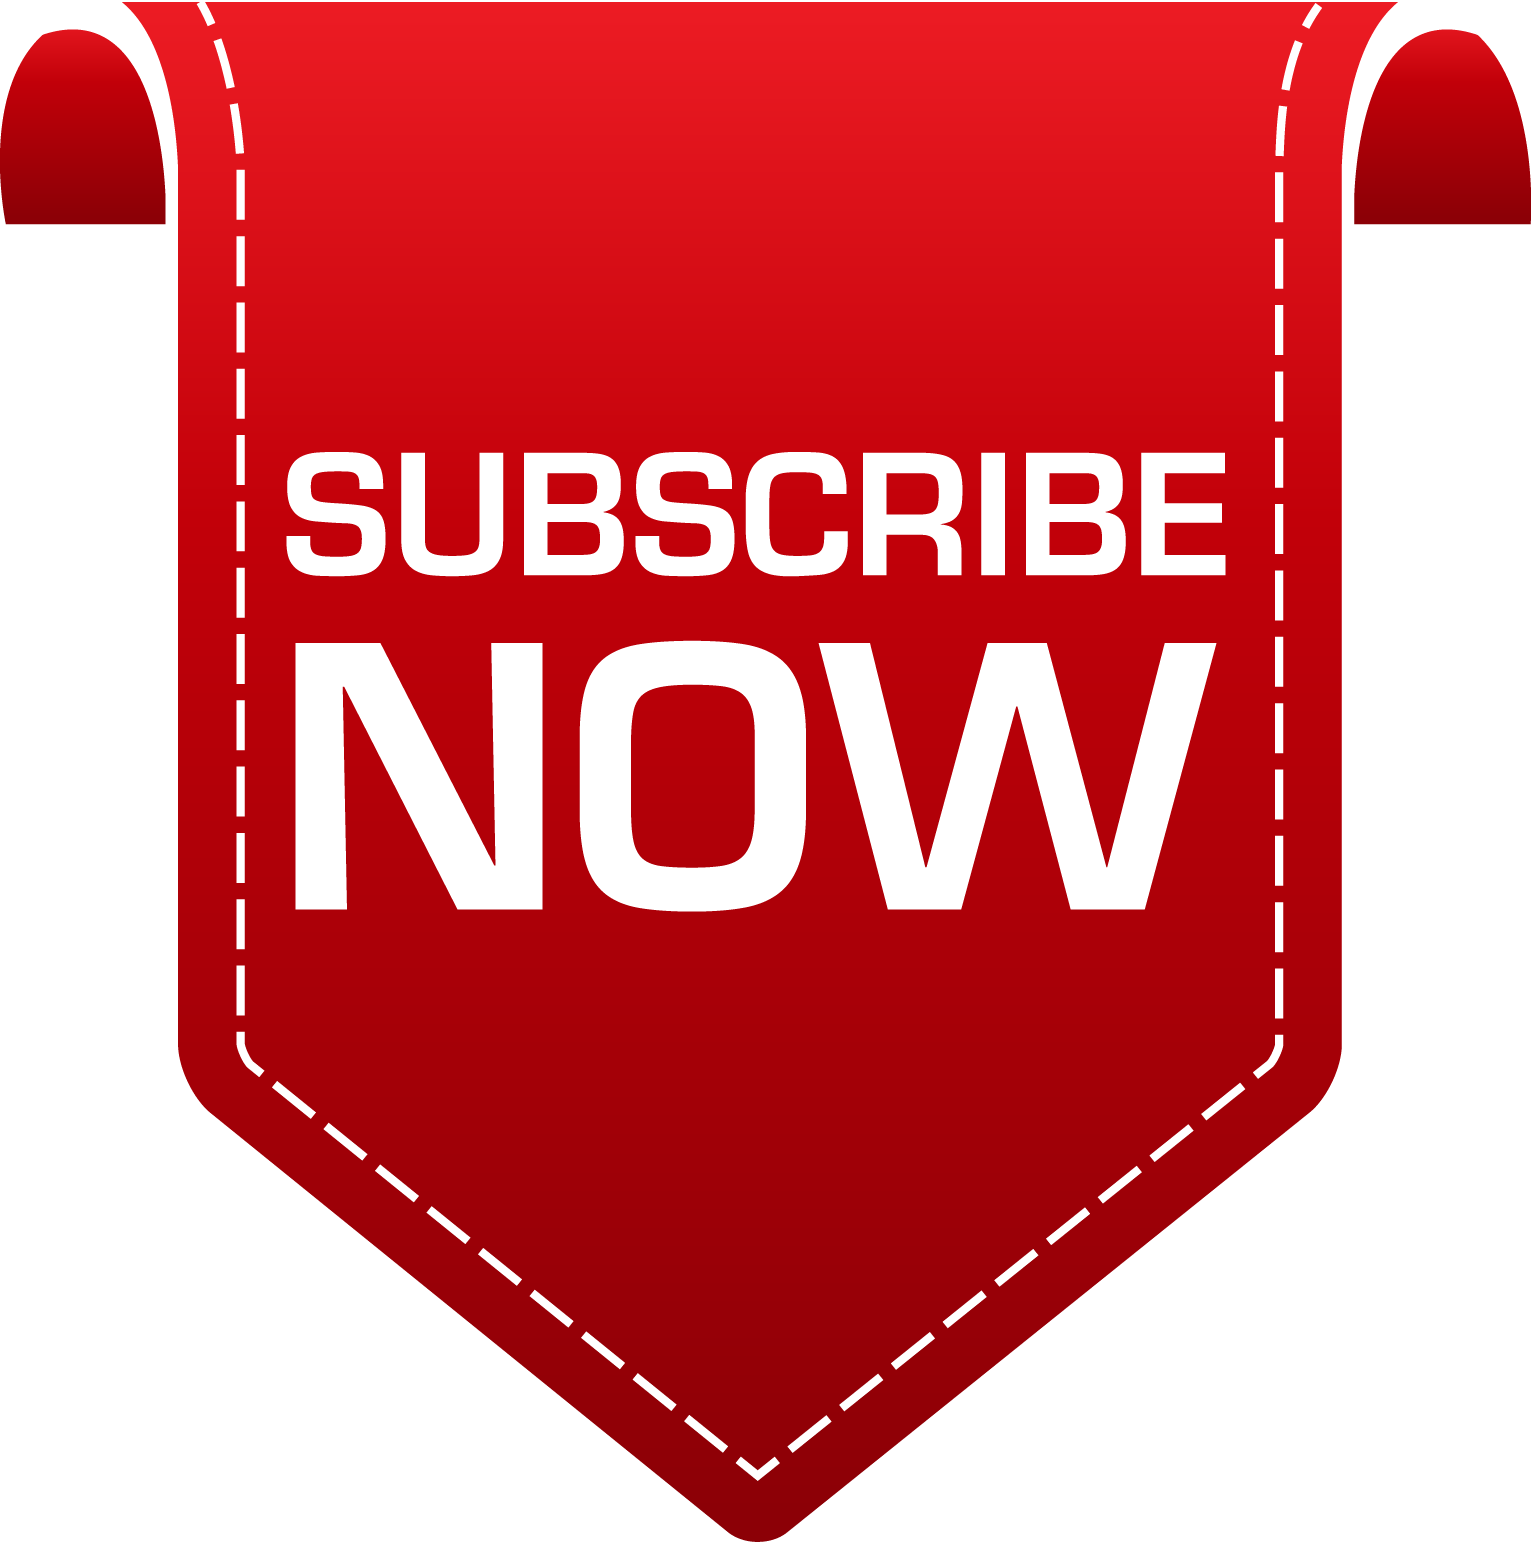 Subscribe Png 8 PNG Image